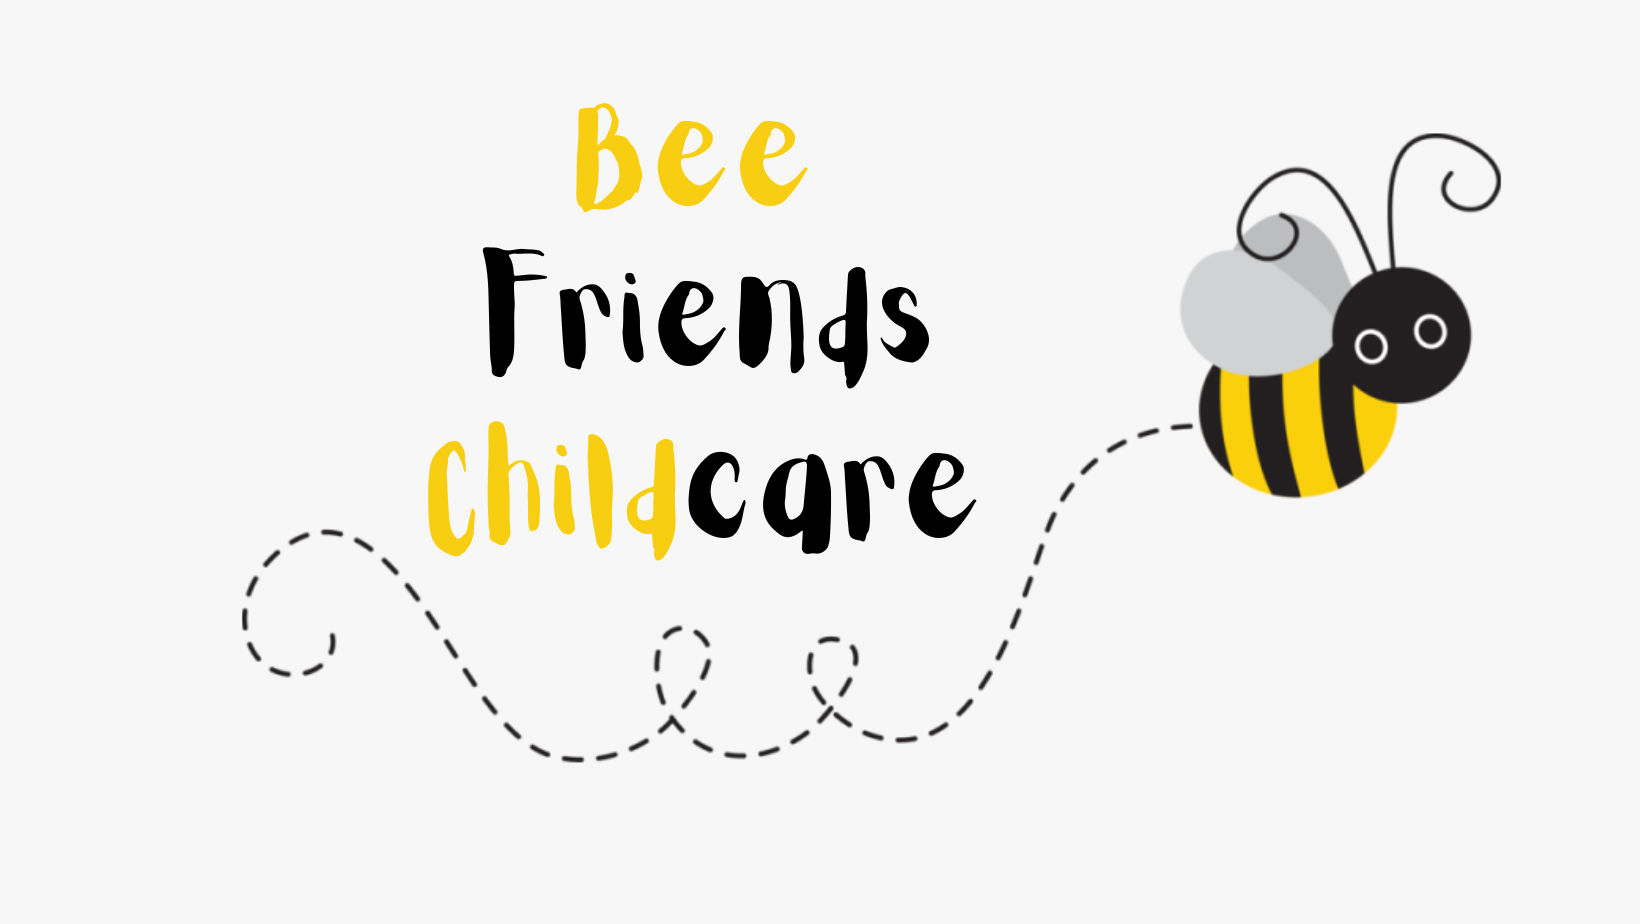 Bee Friends Childcare